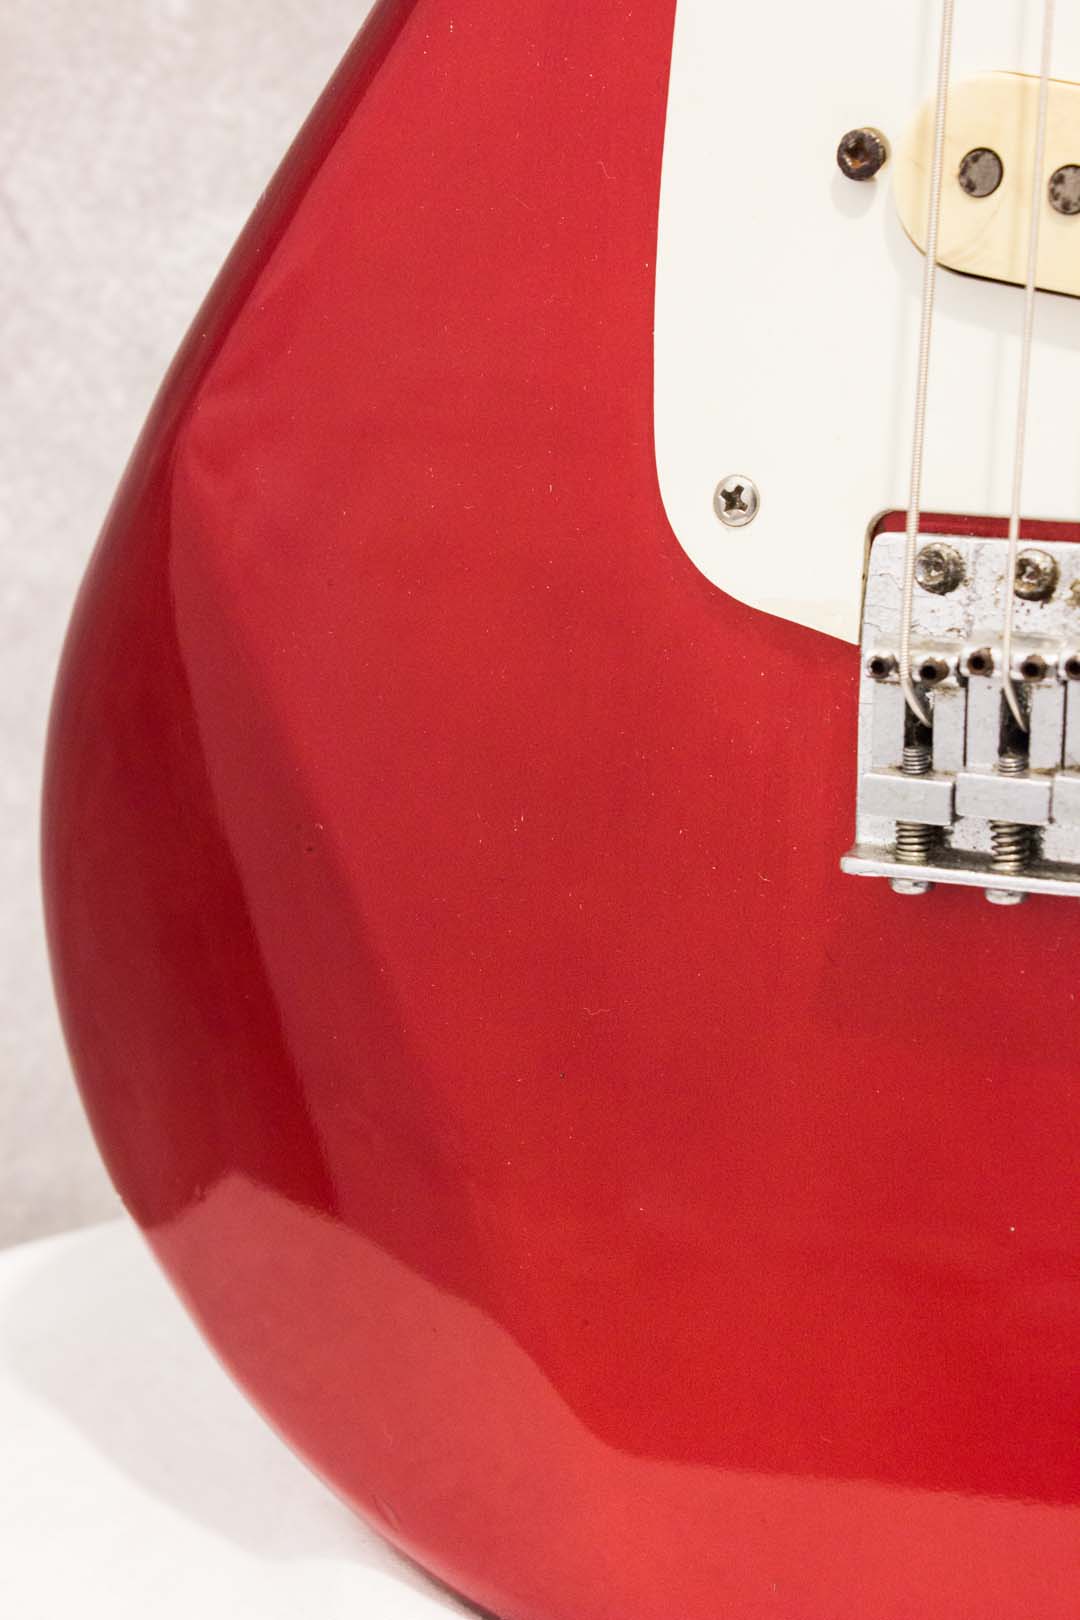 Yamaha SS-300 Candy Apple Red 1982